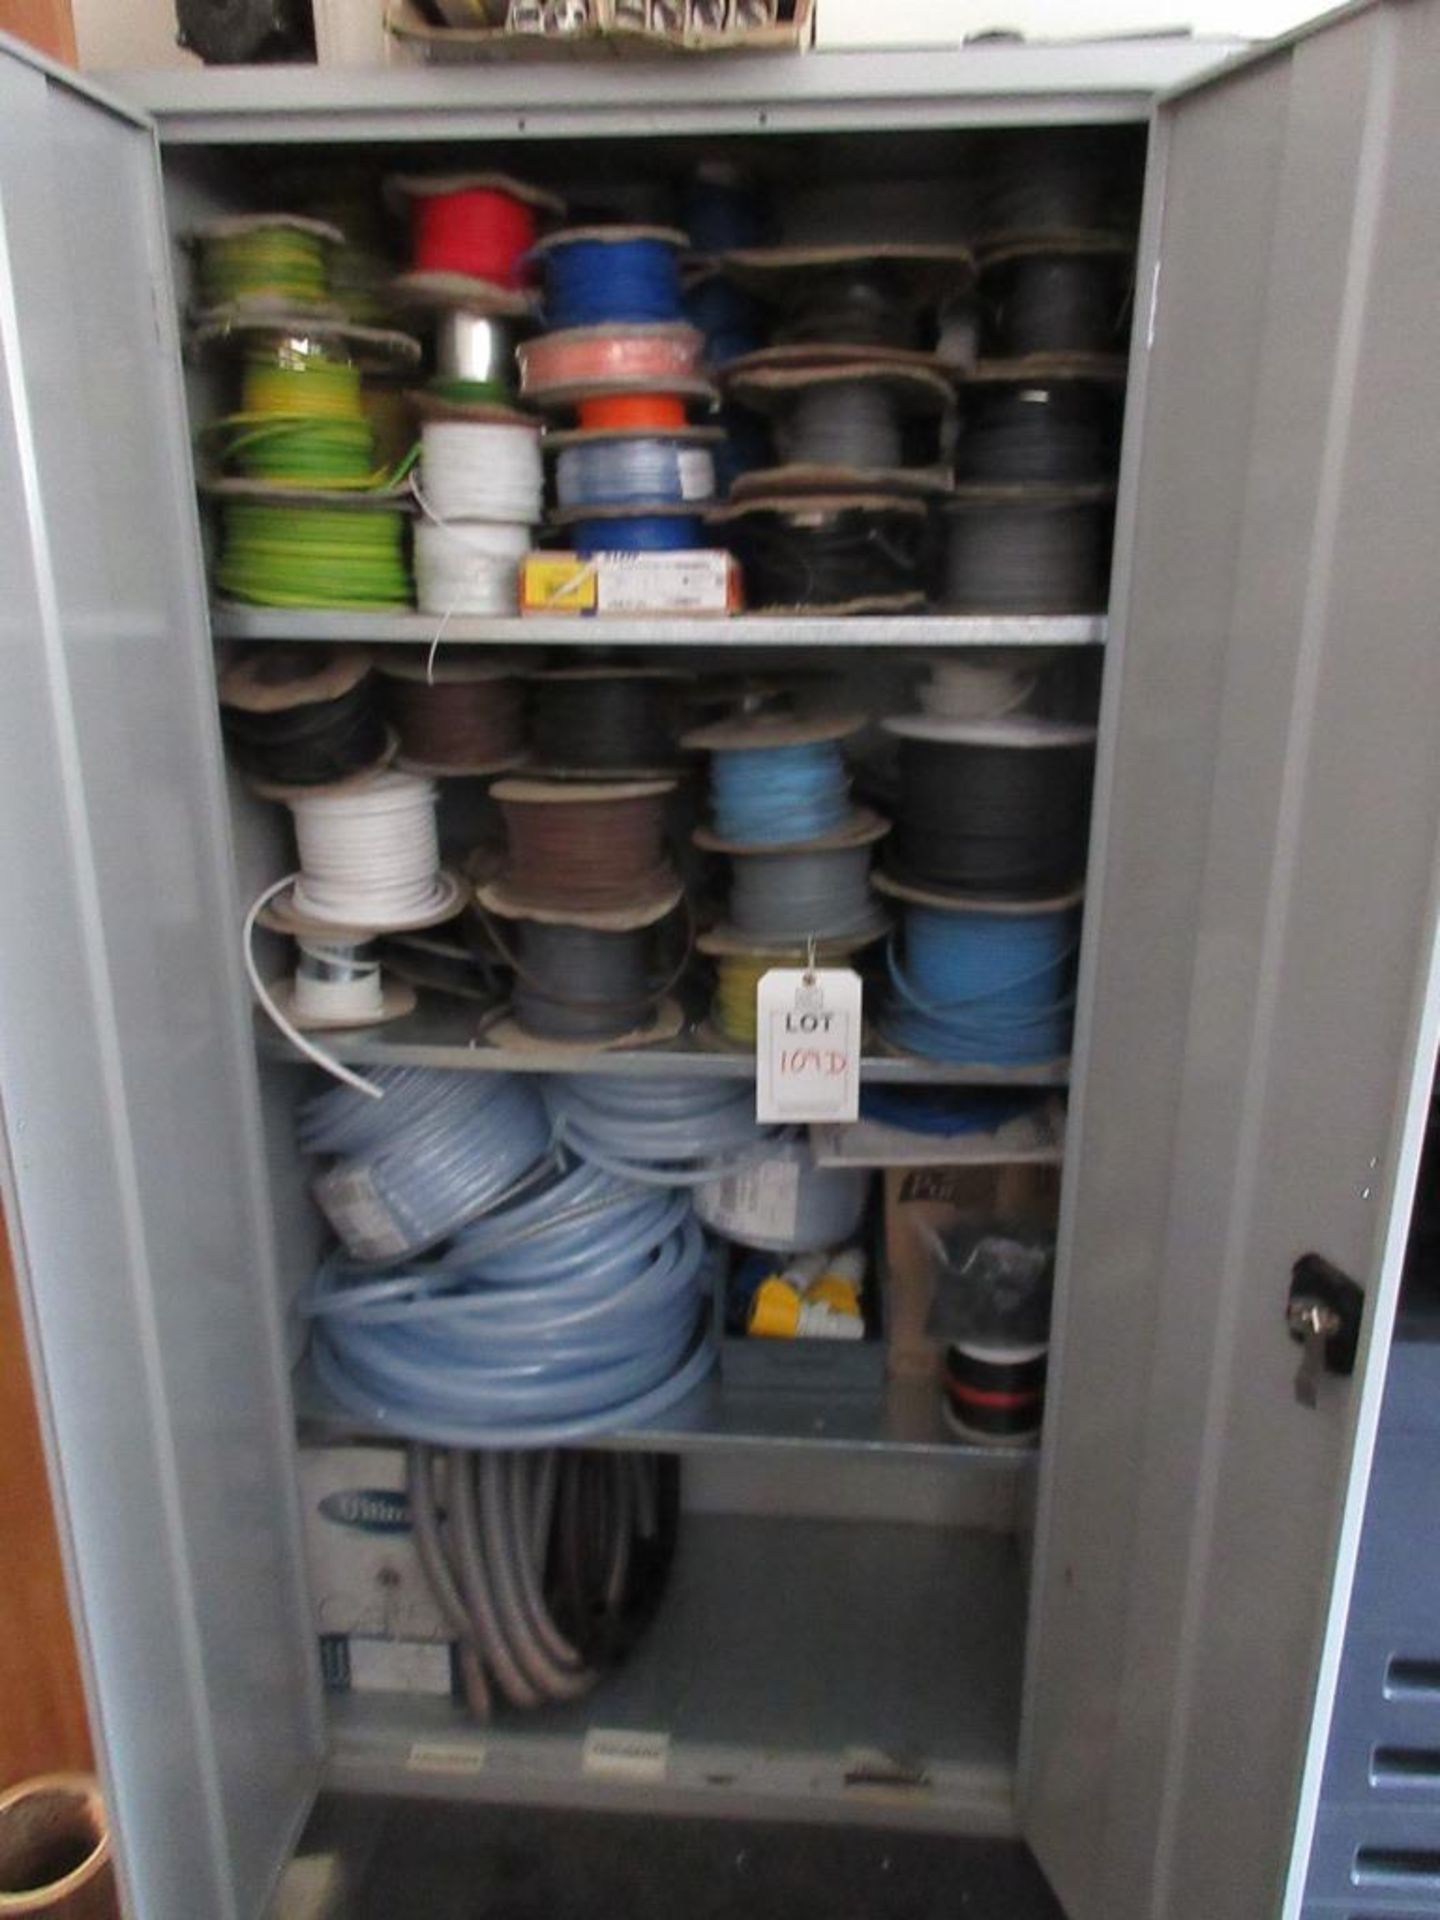 Cupboard and contents including various reeled electrical cable, hosing, etc.